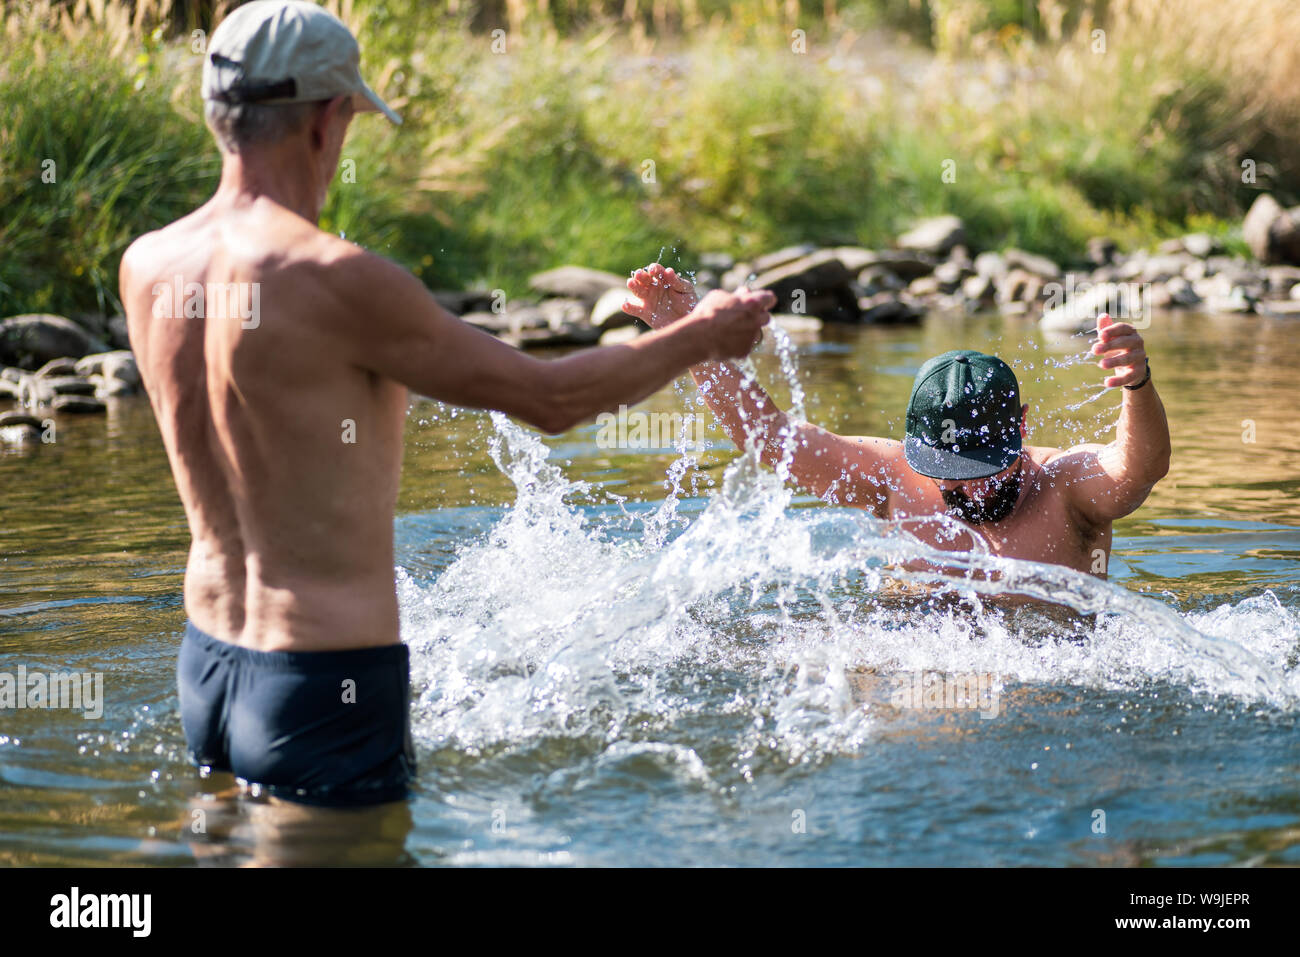 Father and son splashing each other with water in the river, summer fun Stock Photo